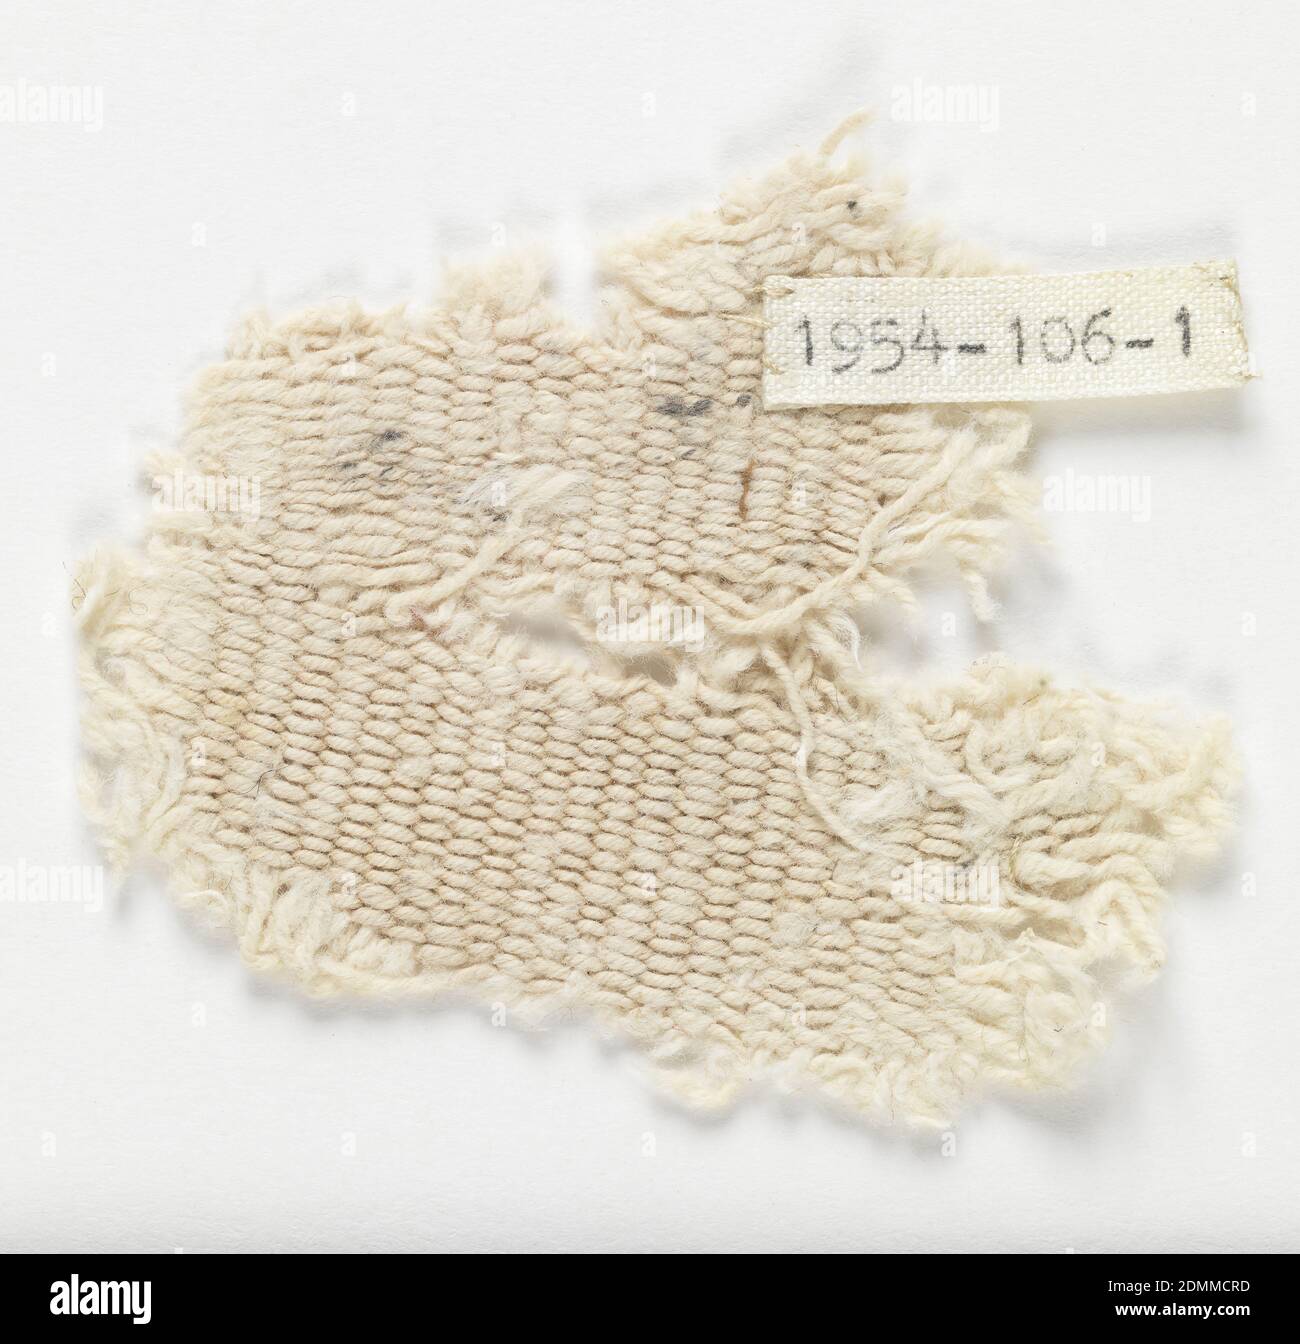 Fragment, Medium: cotton Technique: warp faced plain weave, Part of mile-long piece (end not reached) brought back by Columbia University expedition; found in Cahuachi hacienda, about 15 miles from town of Nazca which is about 80 miles from Paracas. From cache of cloth to be used inside Paracas mummy bundles. White cotton, bleached (?). Heavy weft: Z-piled cotton (4 slightly s-spun strands). Heavier warp: 2-plied strands (2) of S-plied Z-spun cotton., Peru, before 600 AD, woven textiles, Fragment Stock Photo